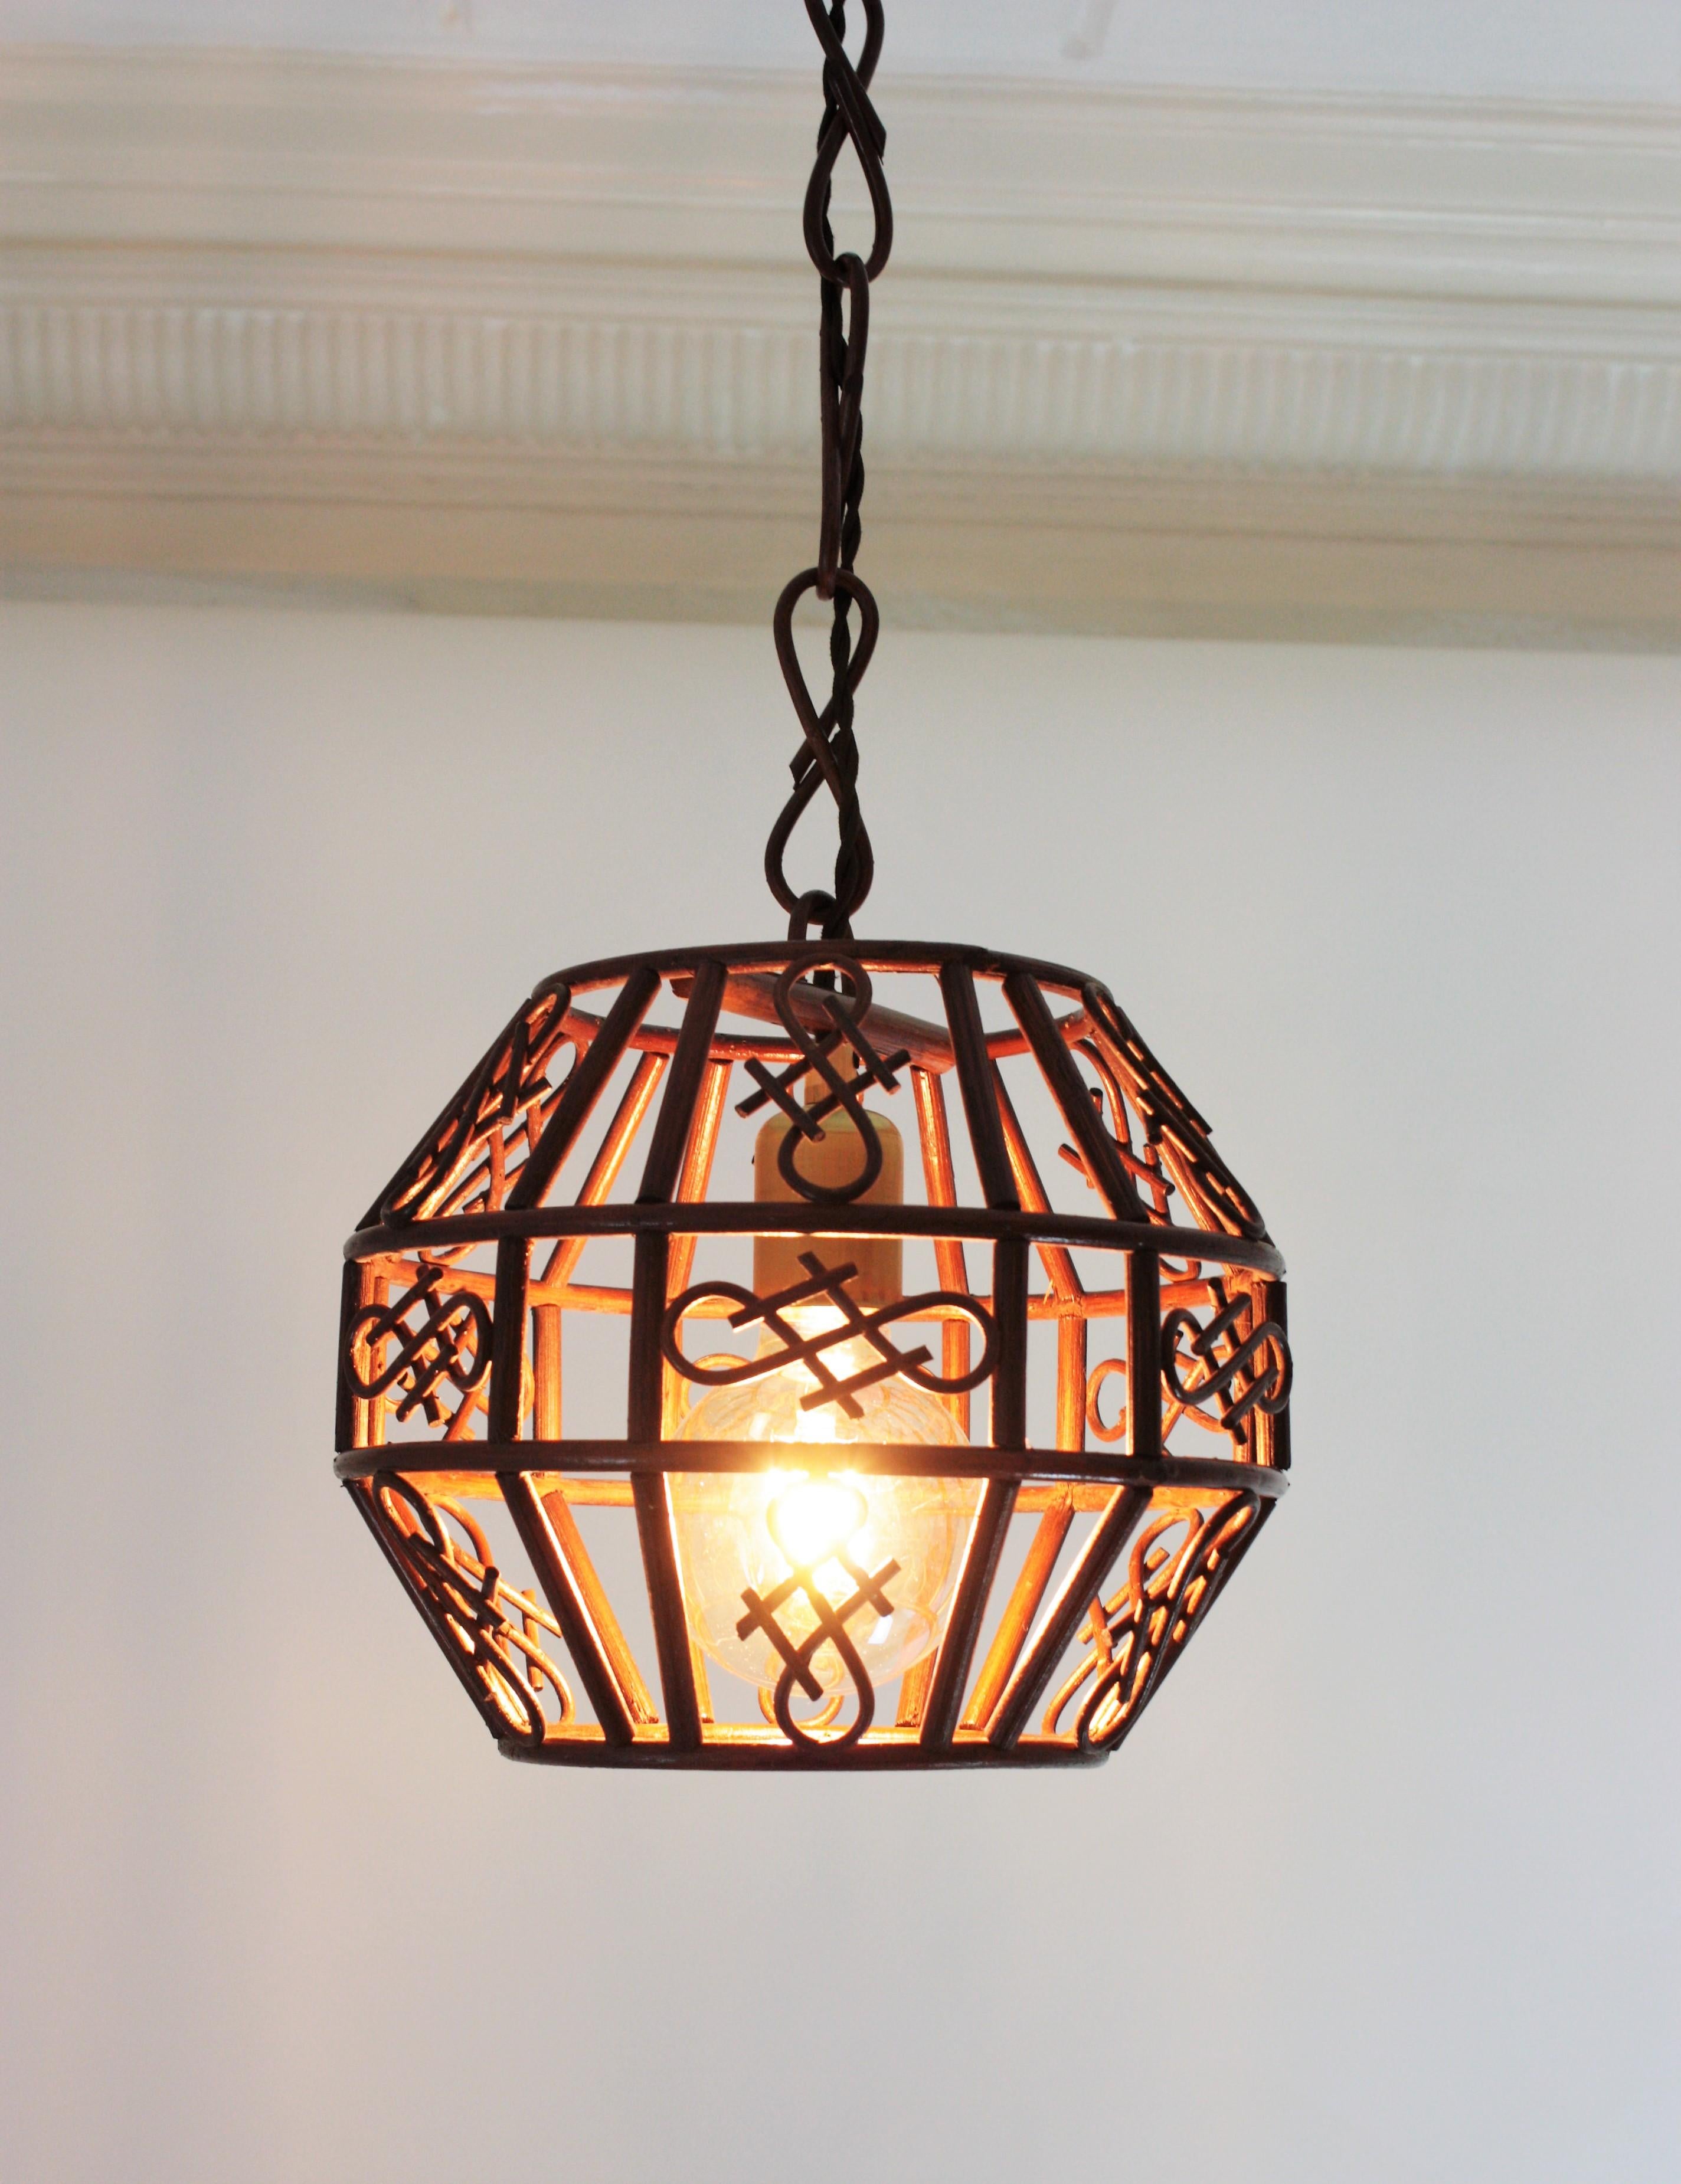 Hand-Crafted Pair of French Rattan Pendant Lights or Lanterns, 1960s For Sale